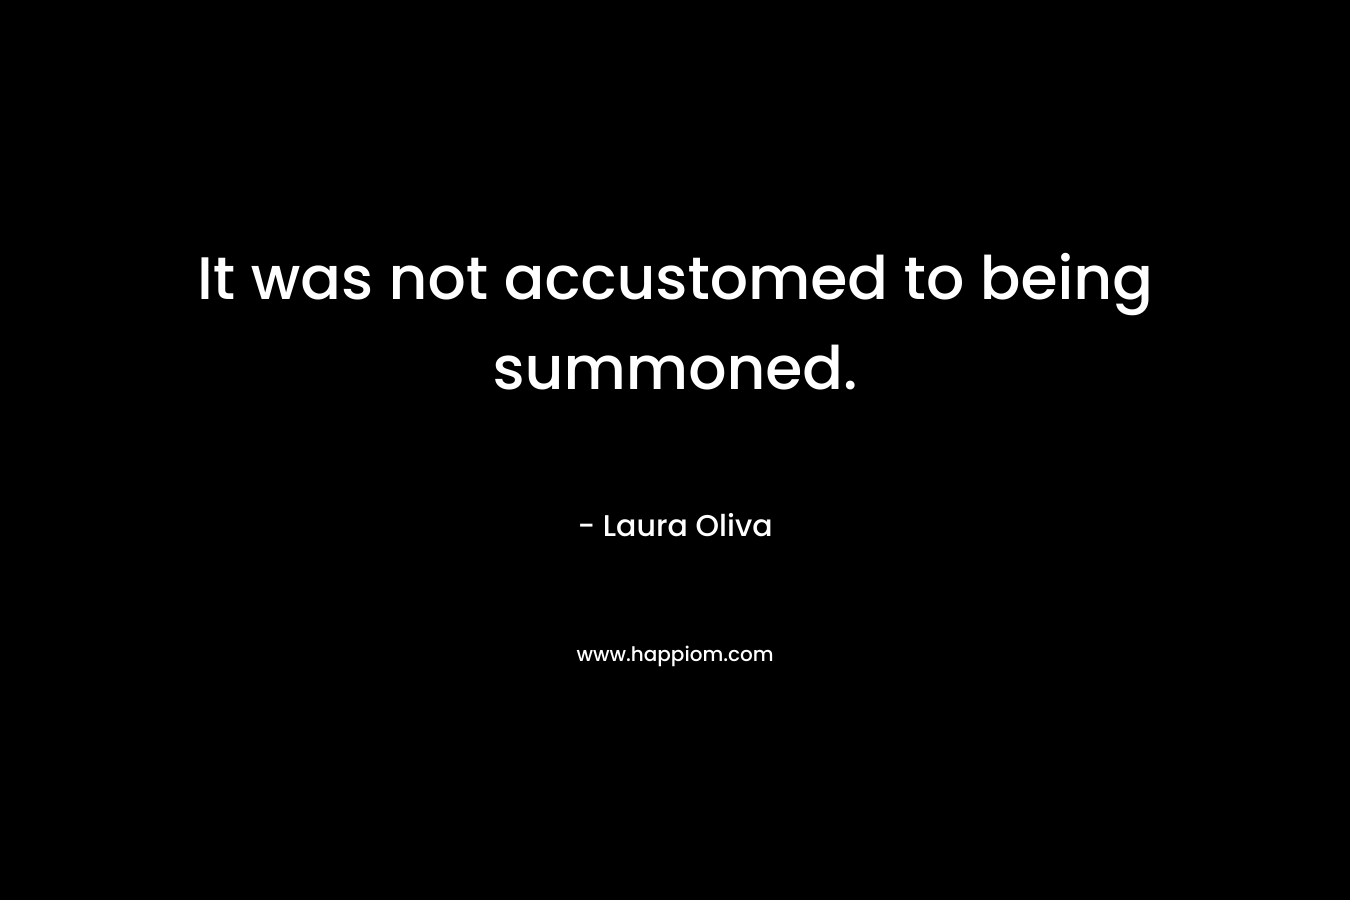 It was not accustomed to being summoned.